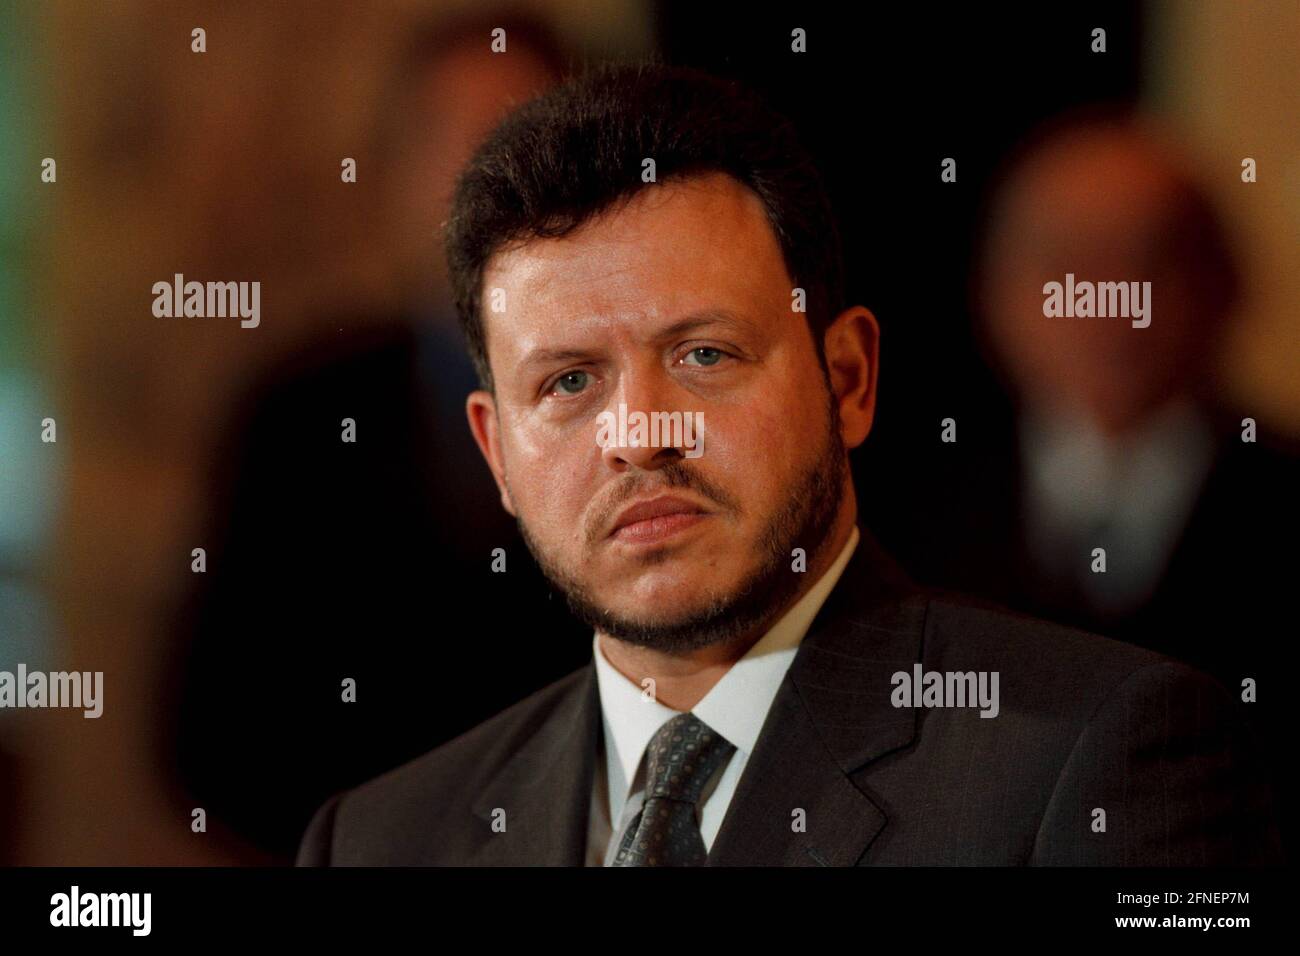 Abdullah Bin Hussein, King of the Hashemite Kingdom of Jordan, during a press conference. [automated translation] Stock Photo